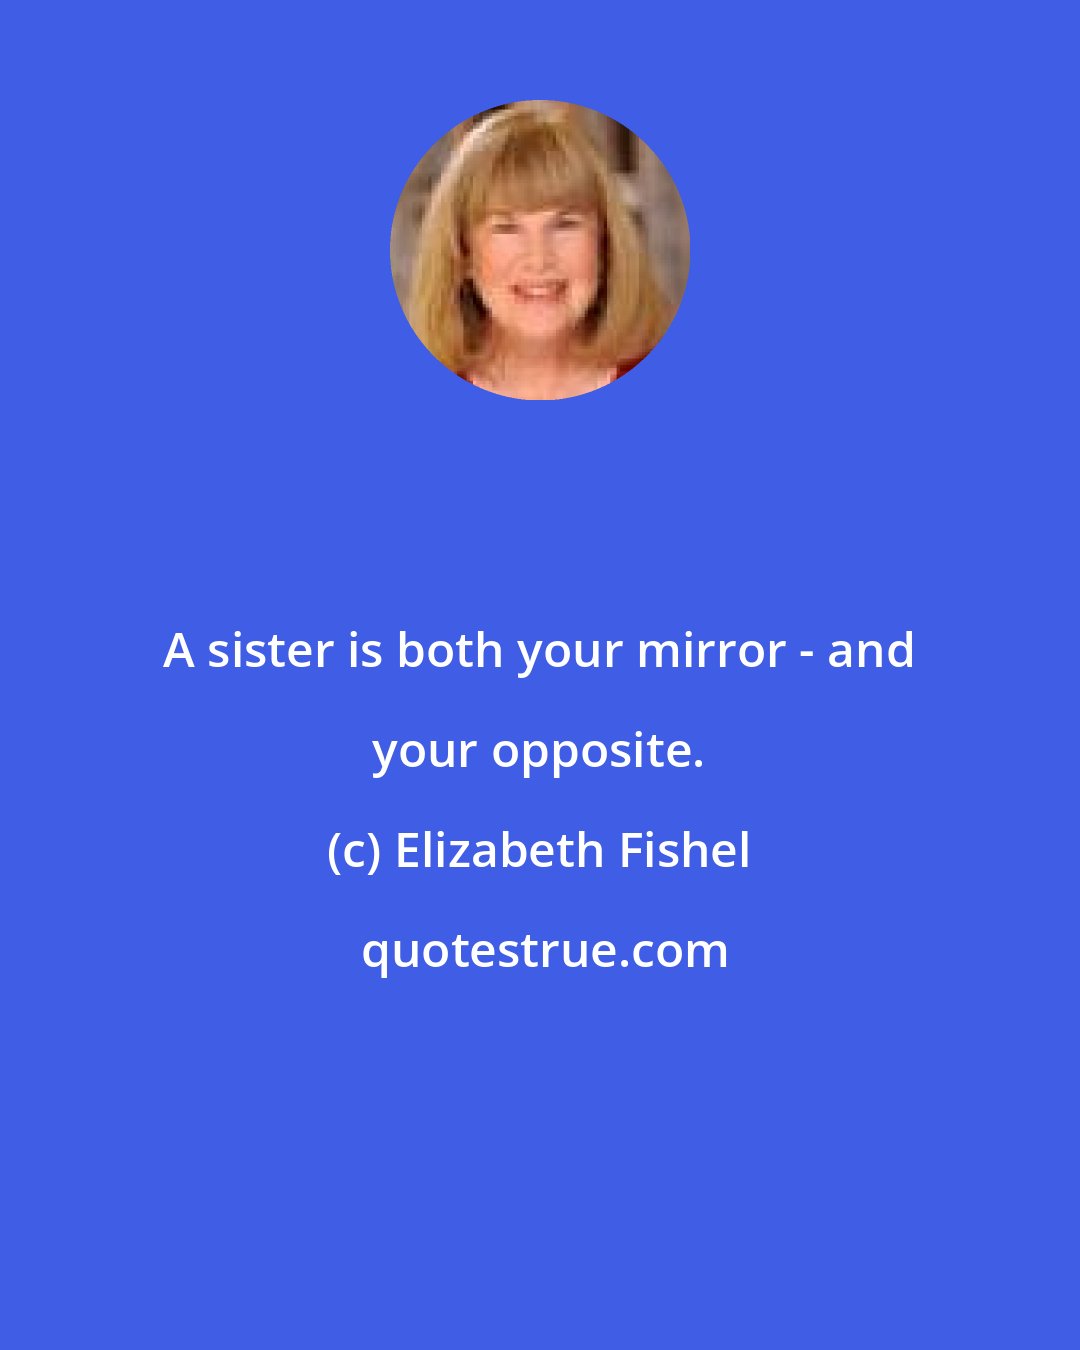 Elizabeth Fishel: A sister is both your mirror - and your opposite.